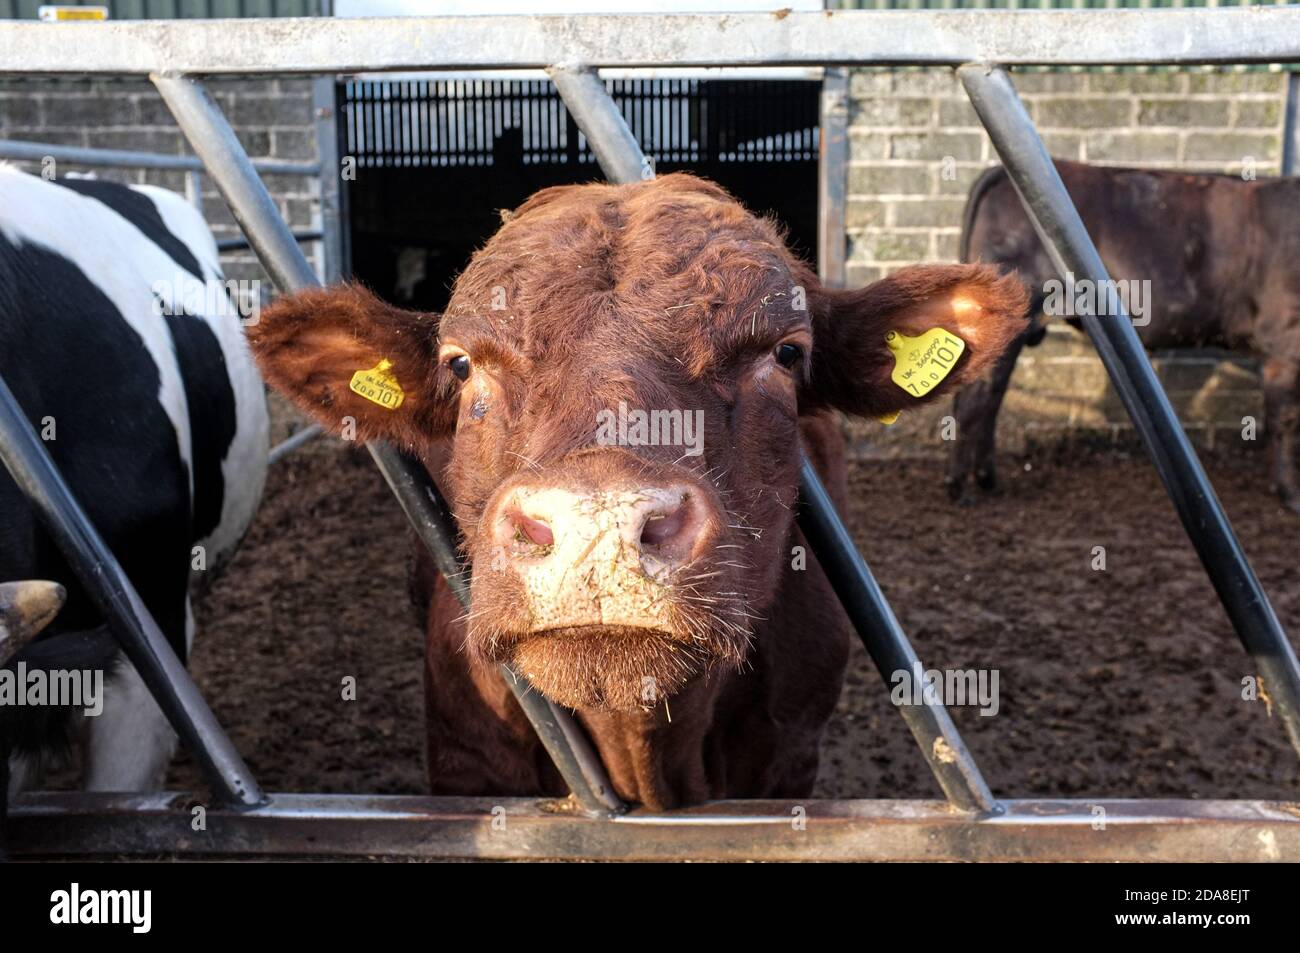 Cow wearing tags in ears standing with head between bars of feed station with other cattle looking directly into camera. Farm Yard Devon, England. Stock Photo